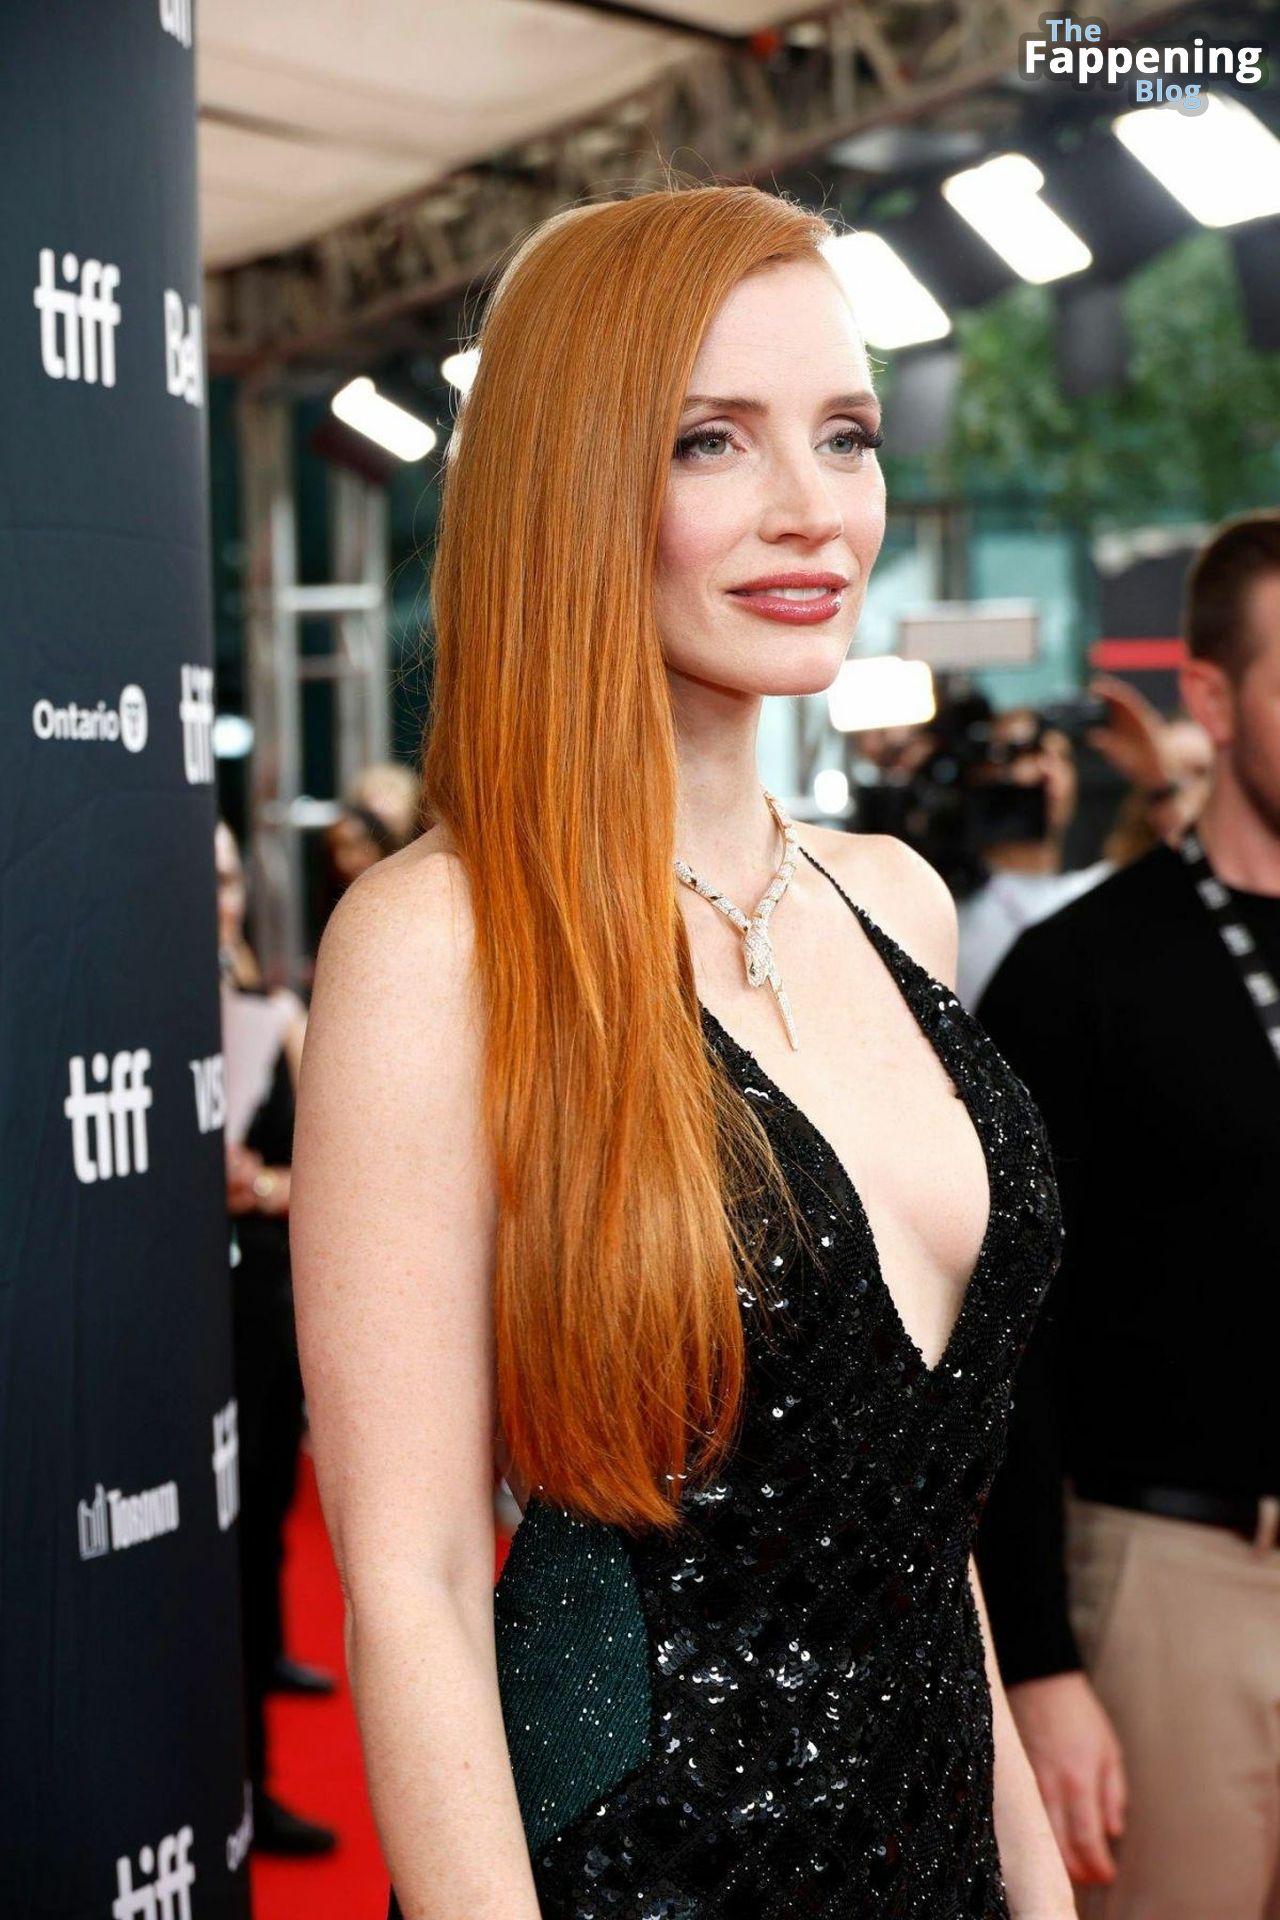 Jessica-Chastain-Sexy-27-The-Fappening-Blog.jpg